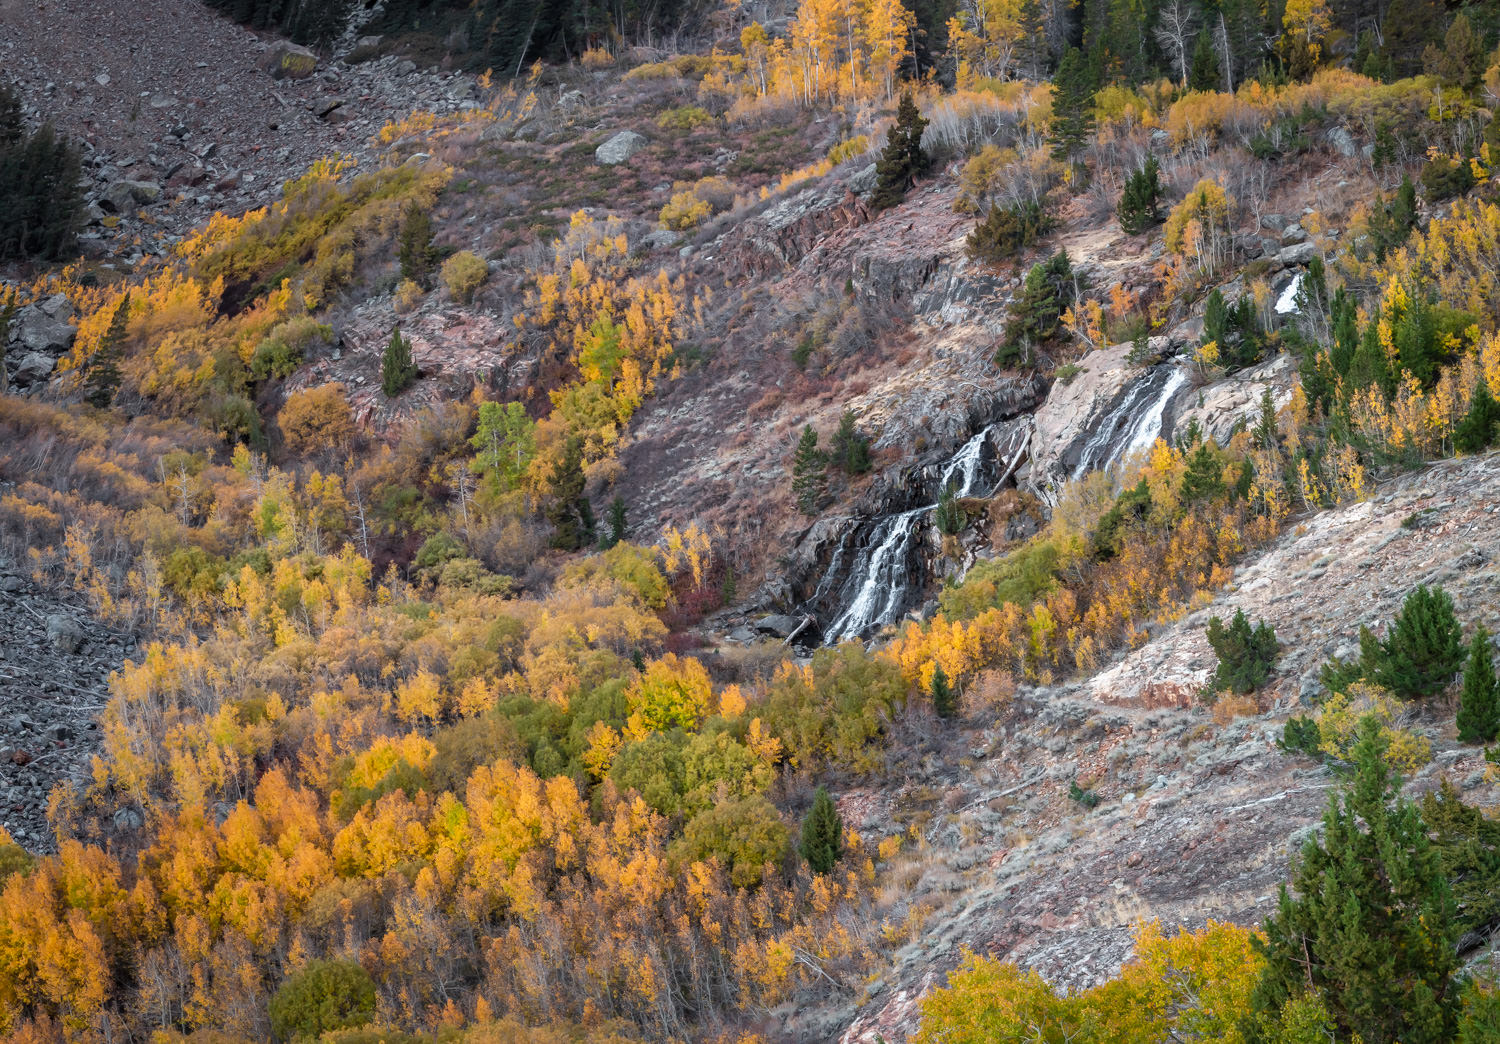 Lundy canyon waterfall (October 2018)